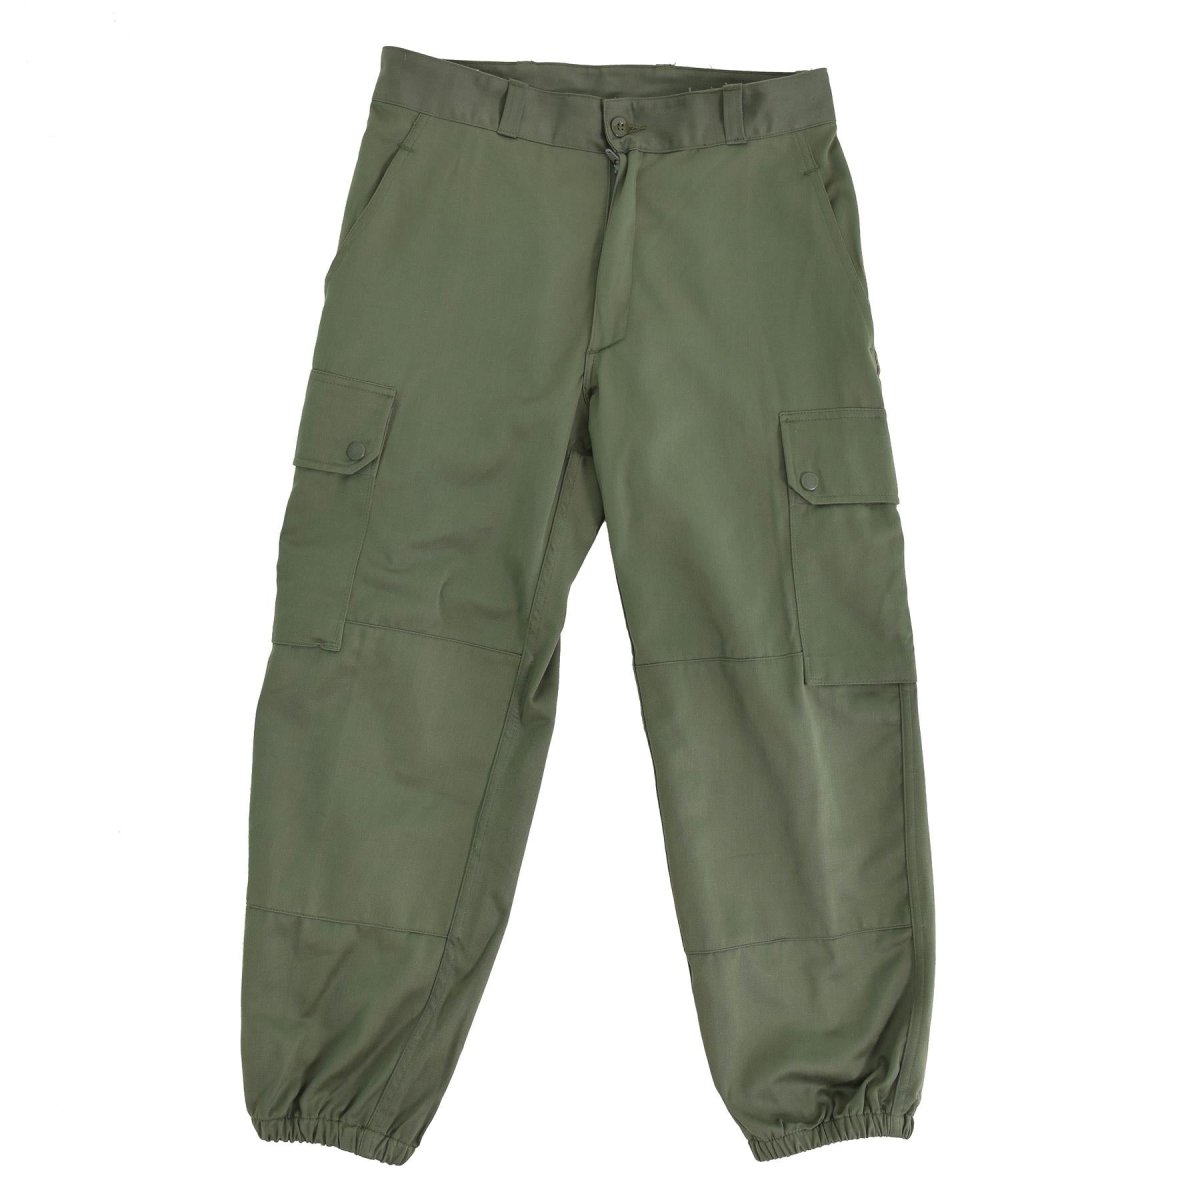 Original French army pants field troops military green BDU trousers su ...